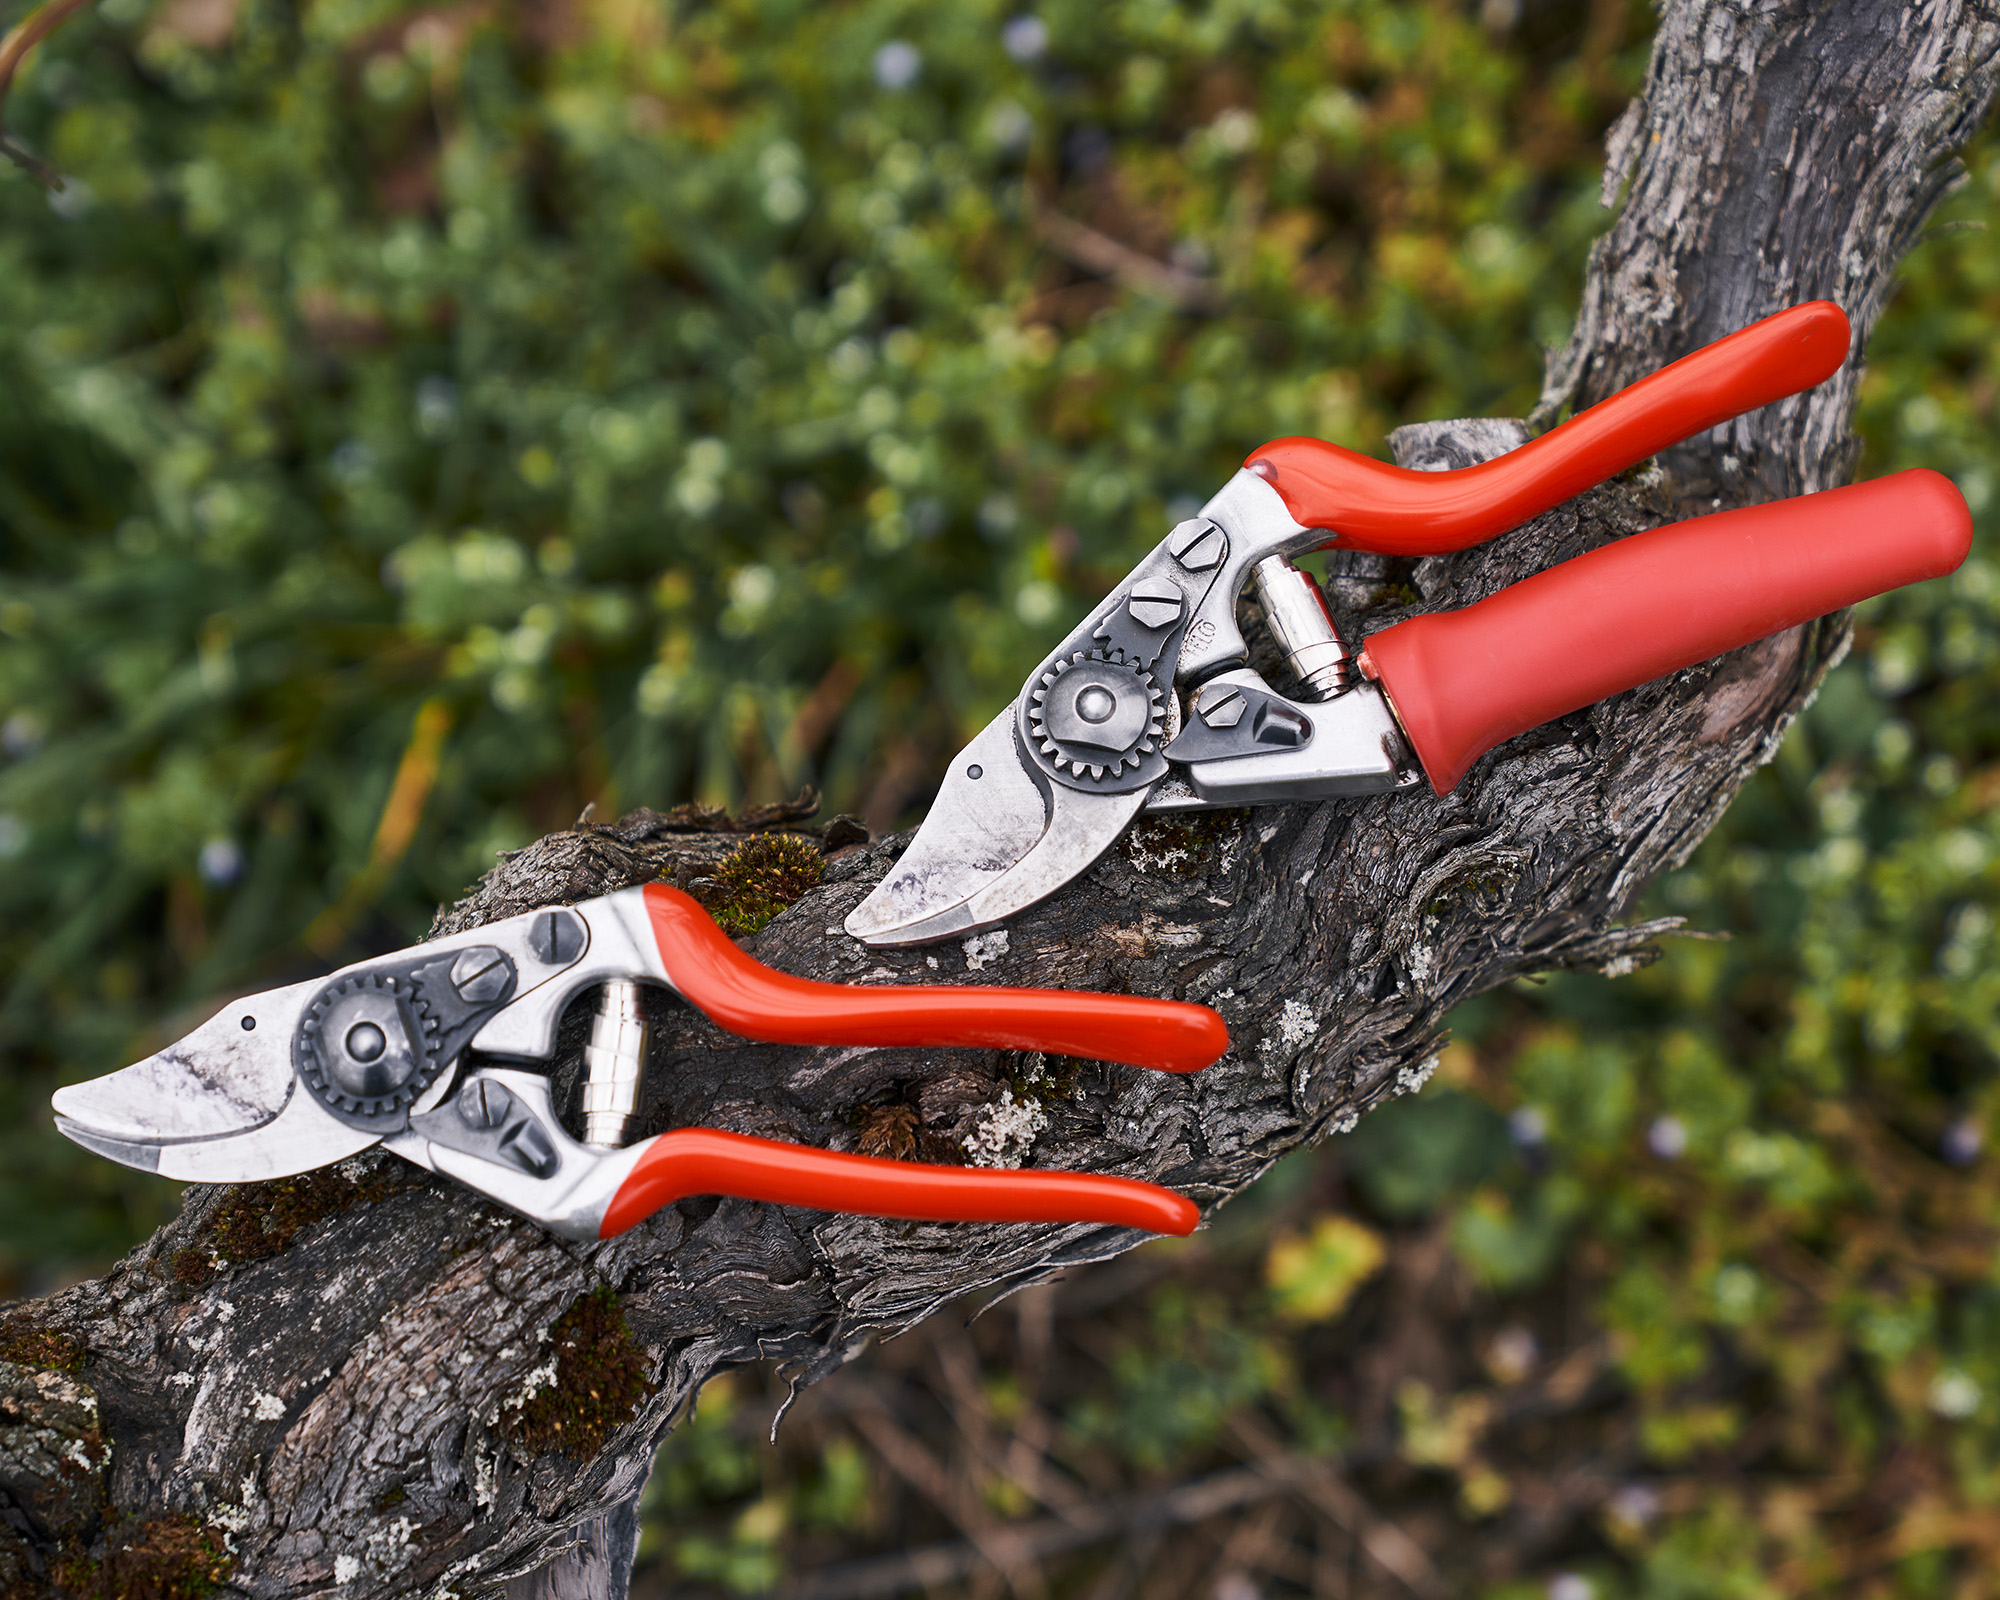 Felco bypass secateurs designed for small hands - Felco 14 and Felco 15 with rotating handle